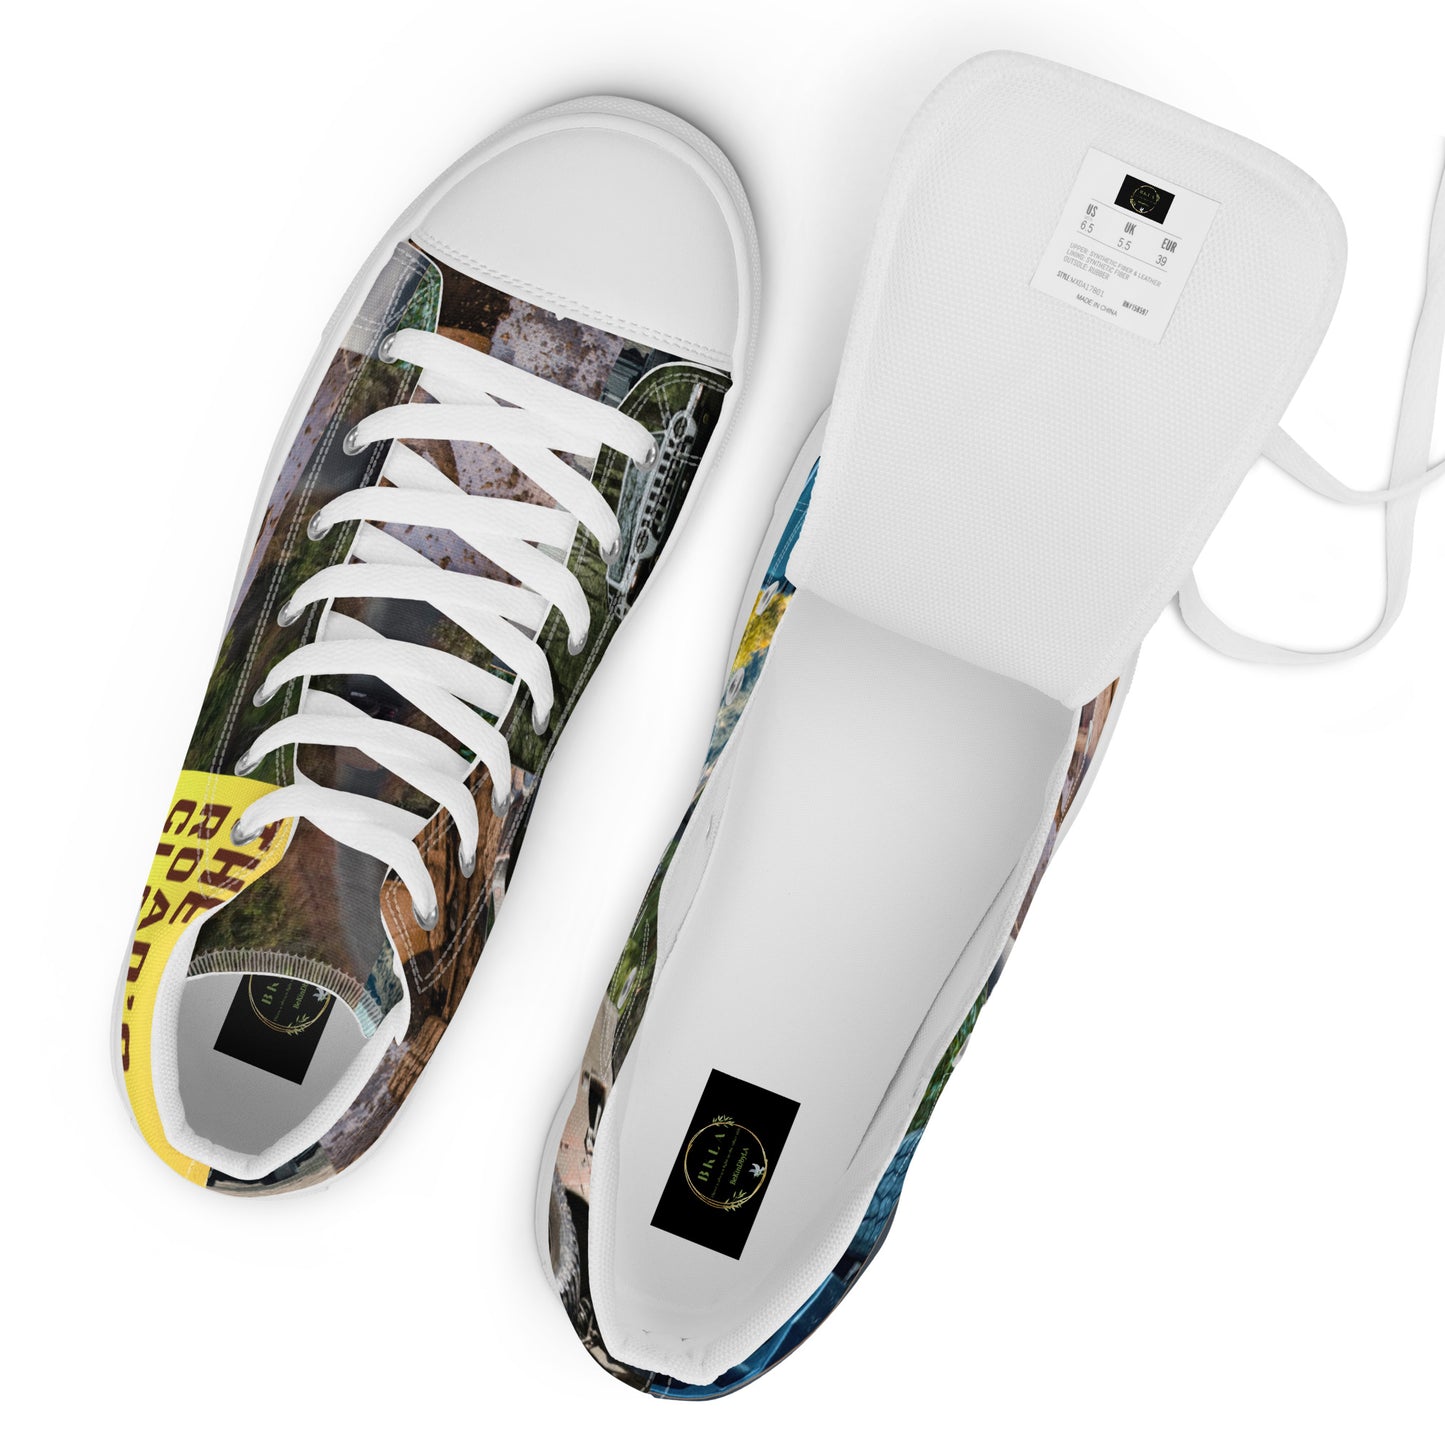 Muddy Life Women’s High Top Canvas Shoes | BKLA | Shoes & Accessories | shoes, hats, phone covers, tote bags, clutch bags